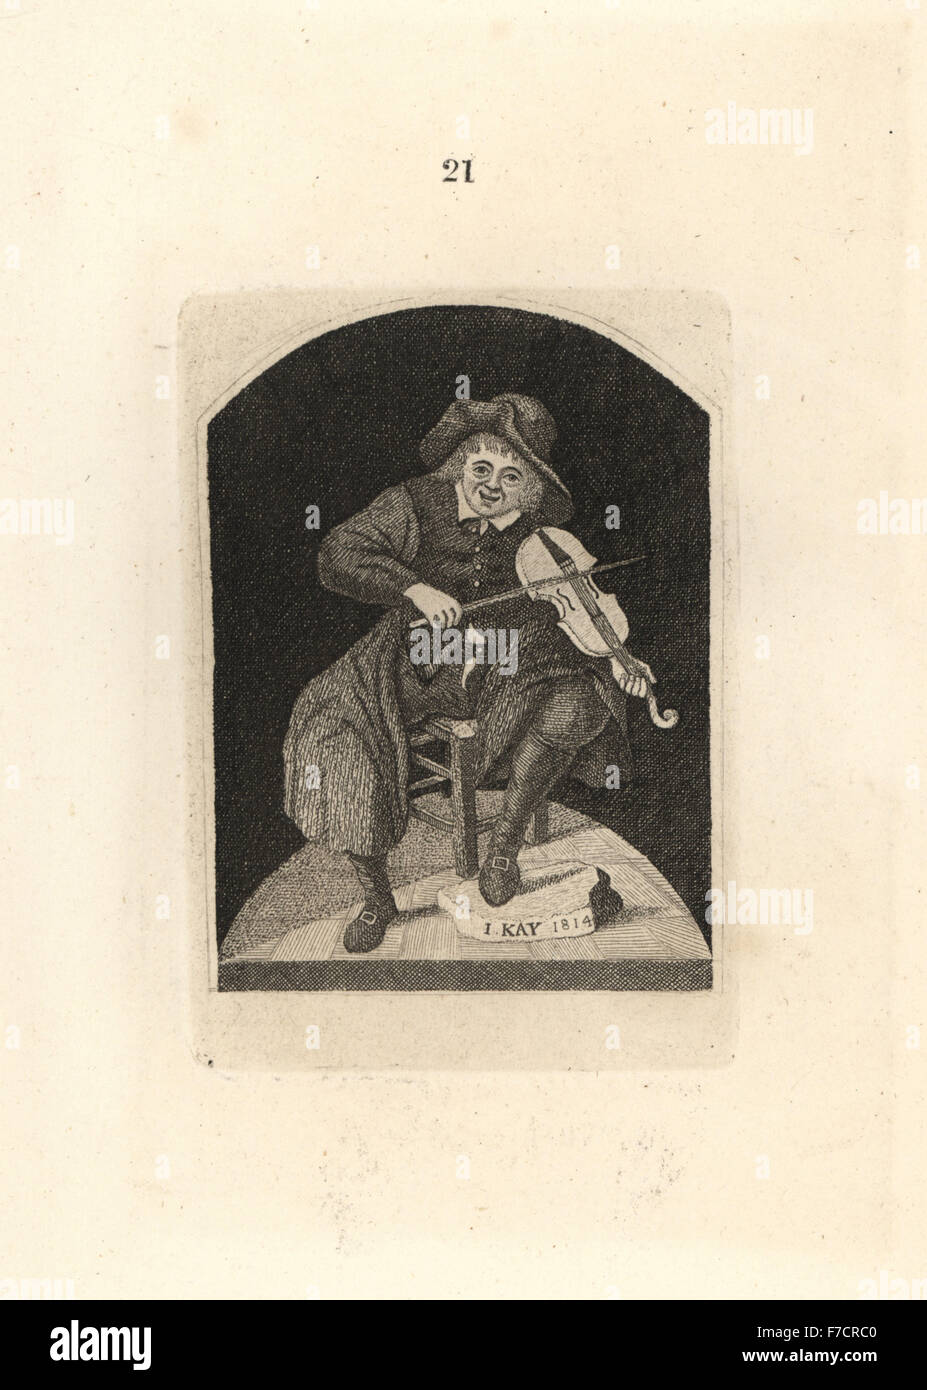 The Fiddler of Glenbirnie. Copperplate engraving by John Kay from A Series of Original Portraits and Caricature Etchings, Hugh Paton, Edinburgh, 1842. Stock Photo